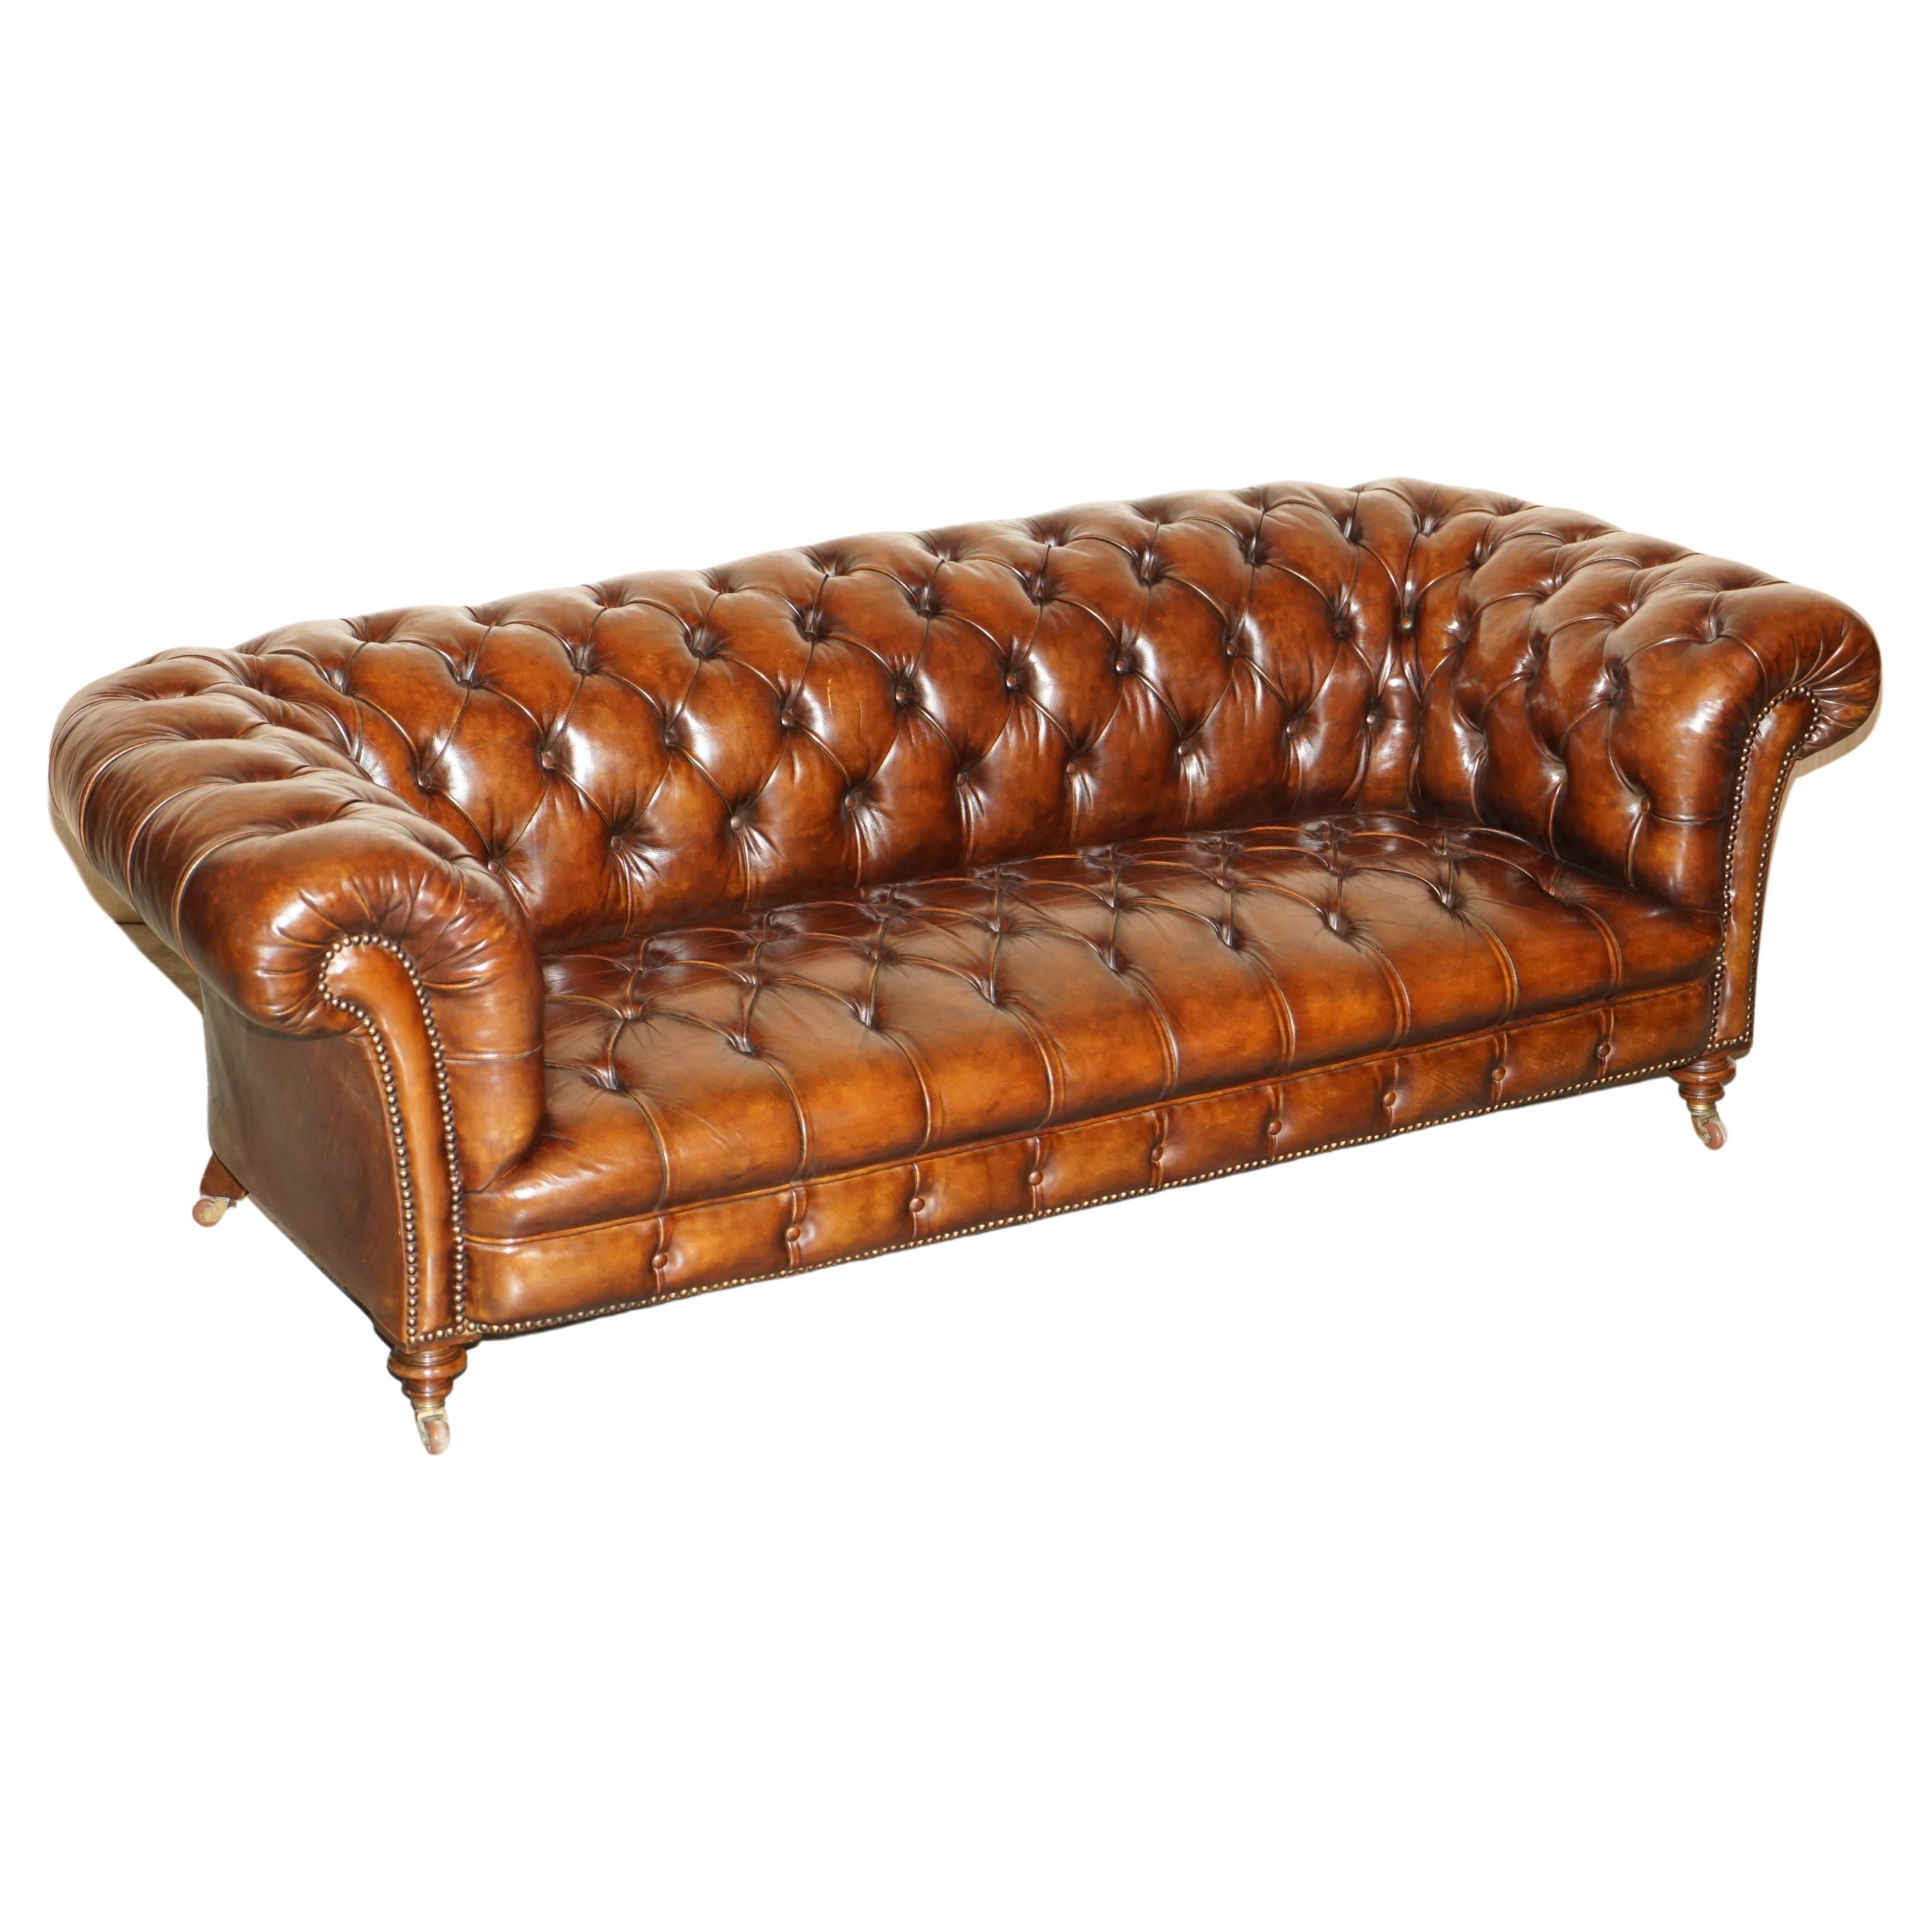 Fine Antique circa 1860 Jas Shoolbred Restored Brown Leather Chesterfield Sofa